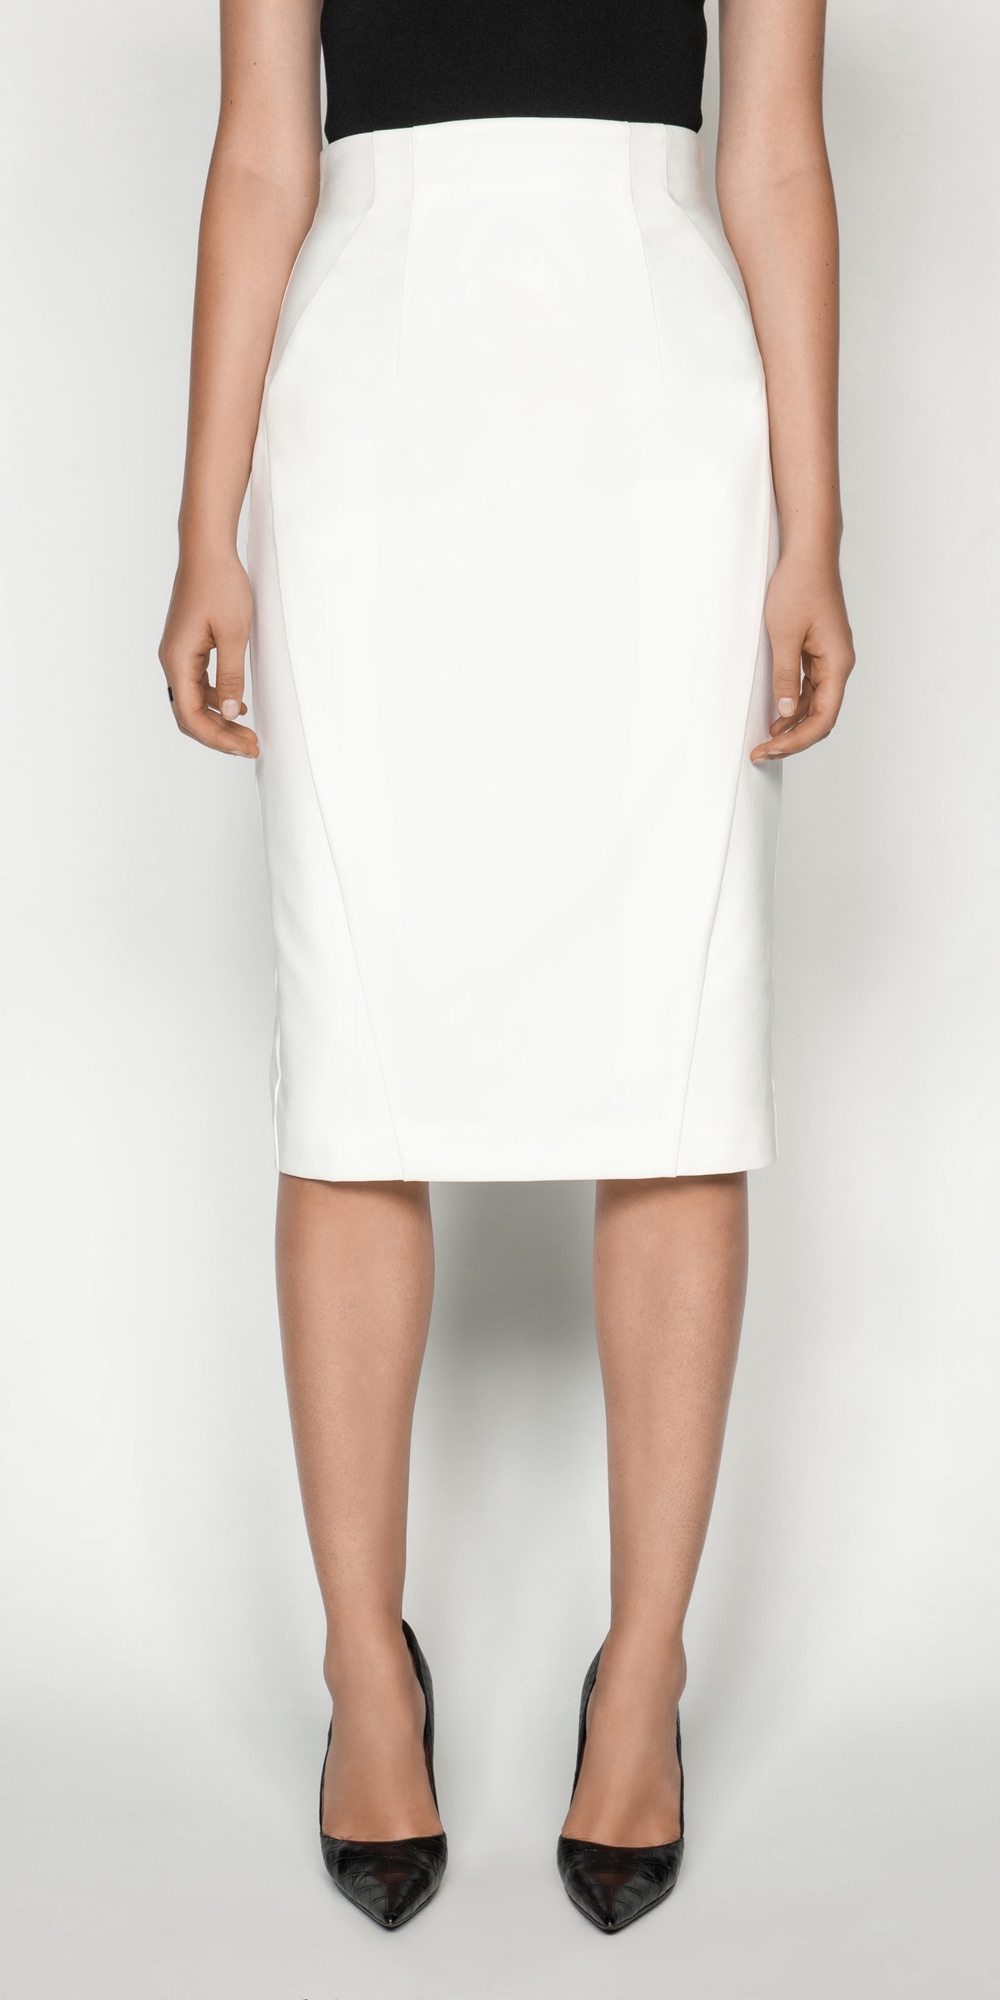 High Waisted Pencil Skirt | Buy Skirts Online - Cue